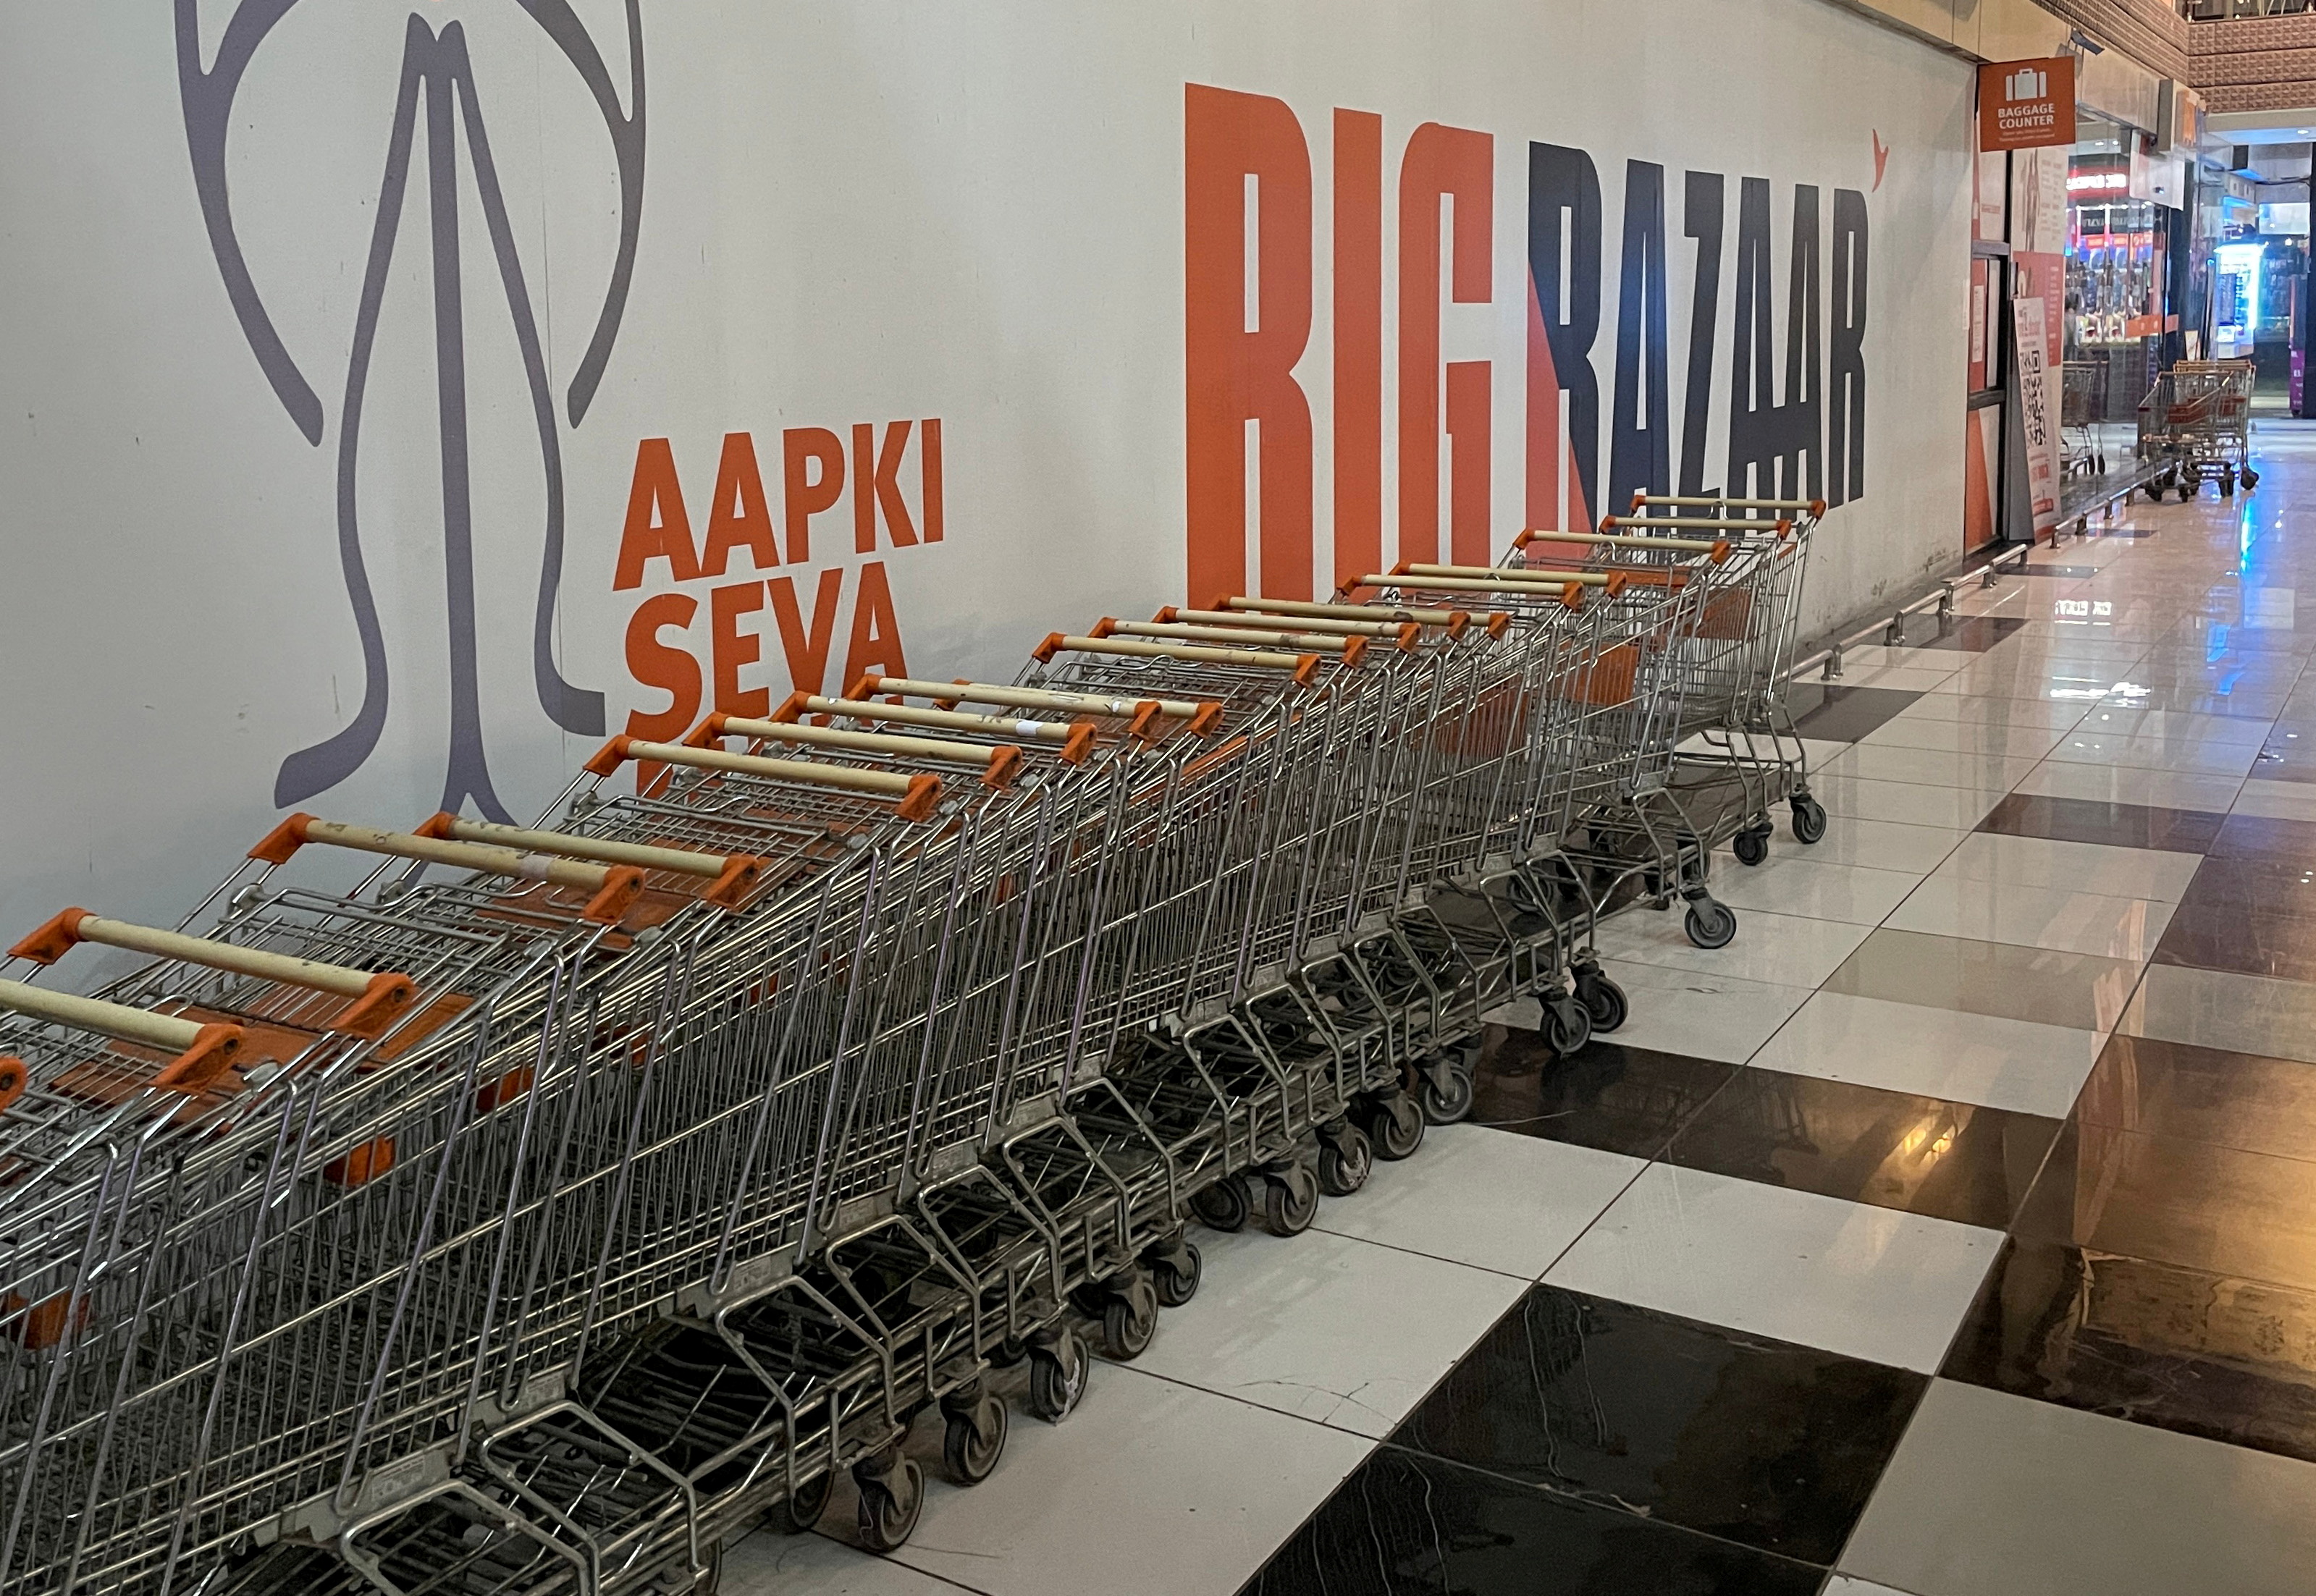 Shopping trolleys are parked outside a closed Big Bazaar retail store on the outskirts of Ahmedabad